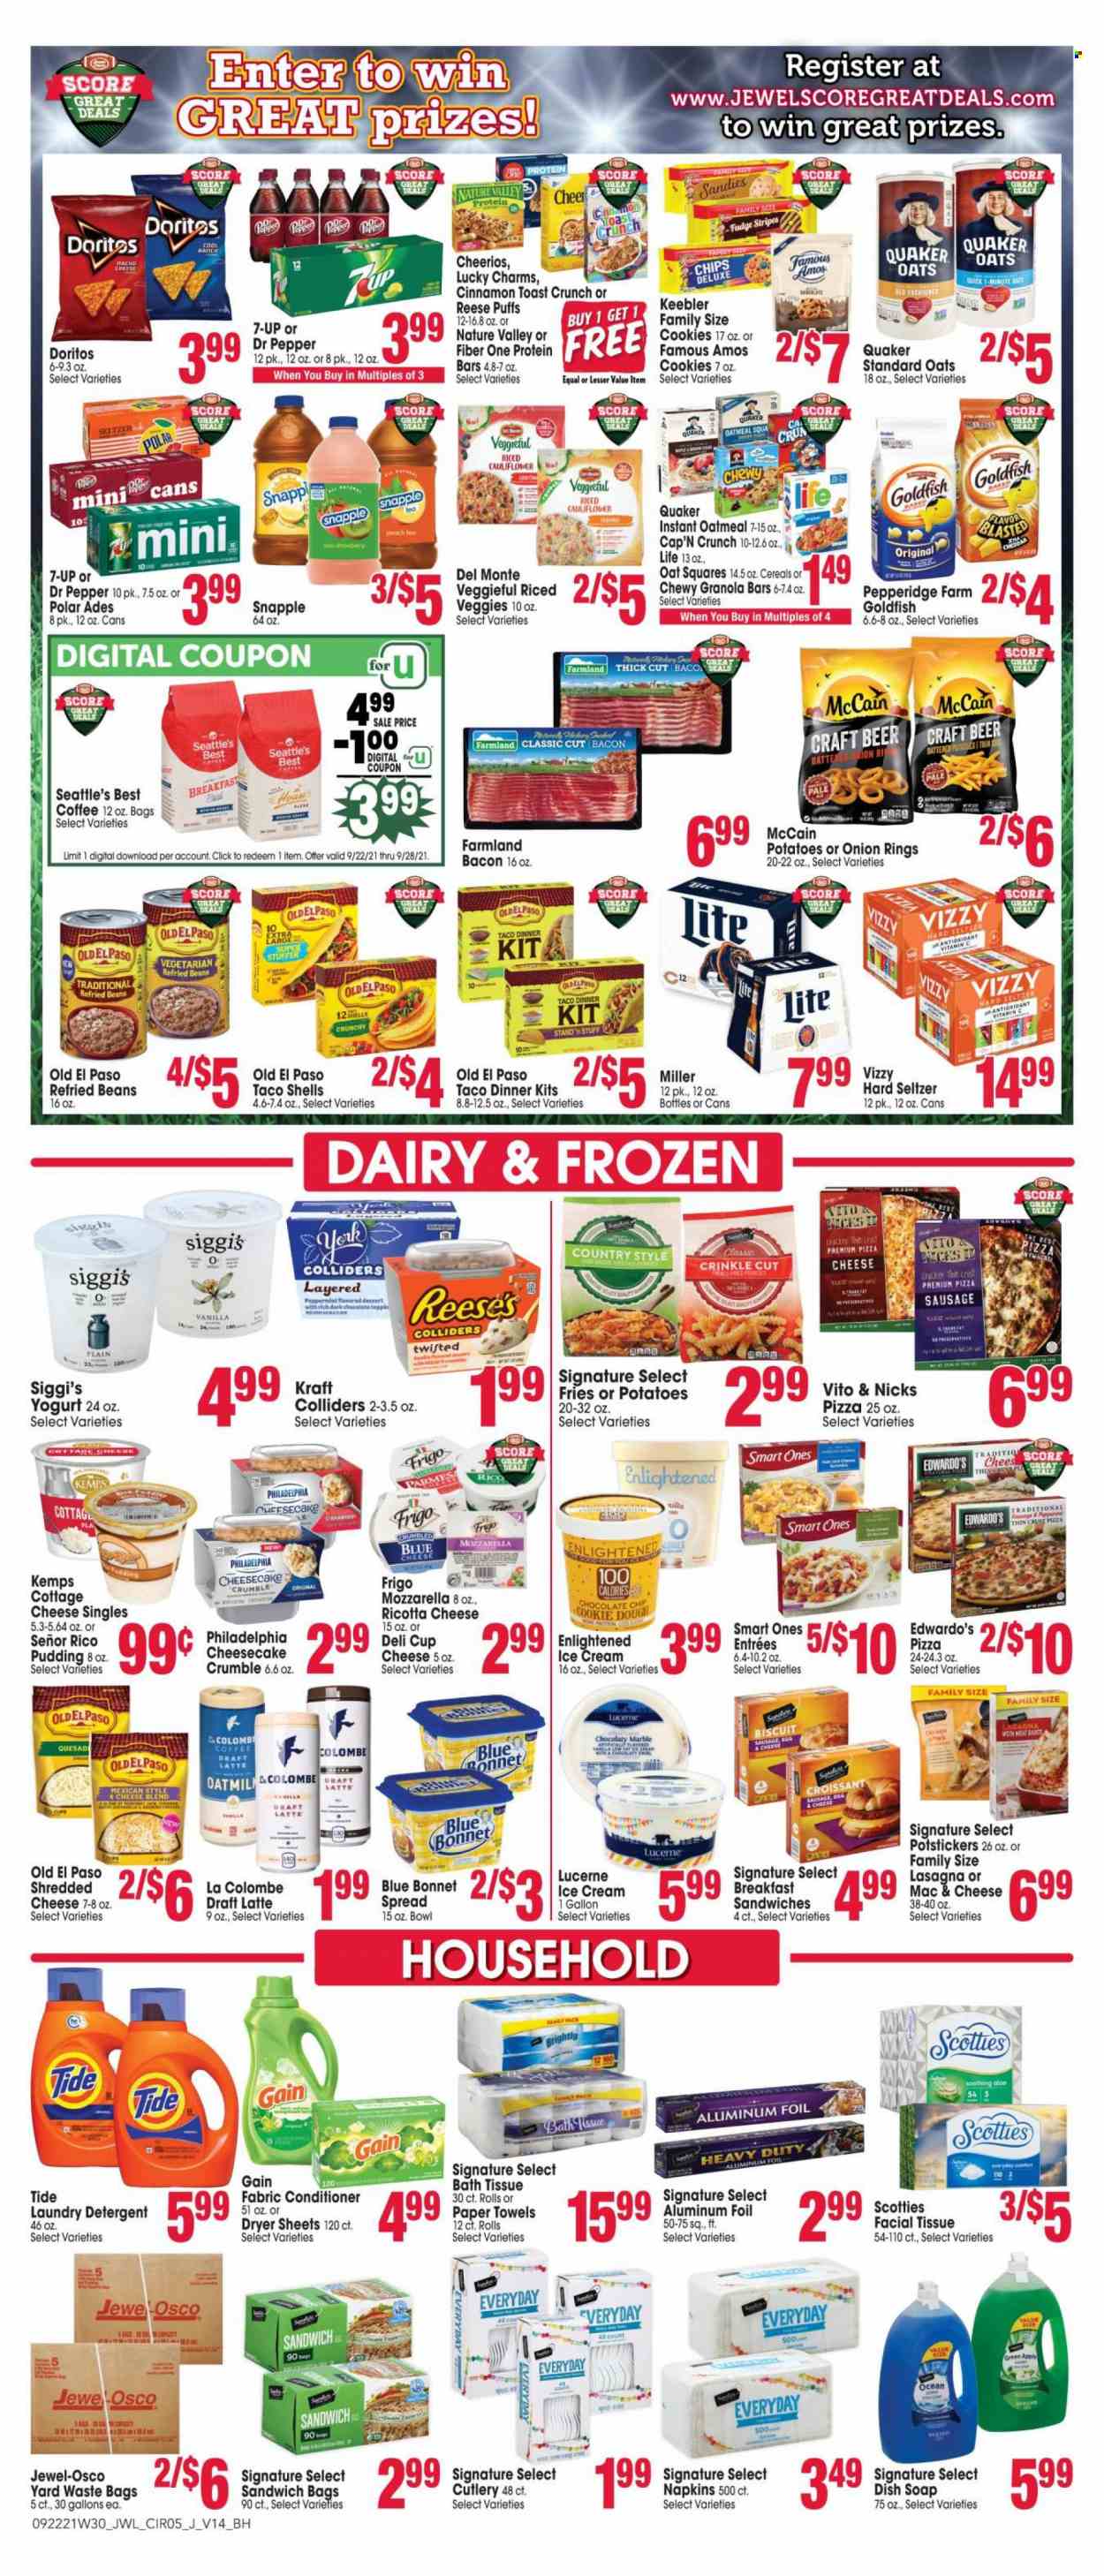 thumbnail - Jewel Osco Flyer - 09/22/2021 - 09/28/2021 - Sales products - Old El Paso, Ace, puffs, potatoes, pizza, onion rings, dinner kit, Quaker, lasagna meal, Kraft®, bacon, sausage, cottage cheese, ricotta, shredded cheese, Philadelphia, Kemps, pudding, yoghurt, eggs, ice cream, Reese's, Enlightened lce Cream, McCain, potato fries, cookie dough, cookies, fudge, crackers, biscuit, Keebler, Doritos, Goldfish, oatmeal, refried beans, cereals, Cheerios, protein bar, granola bar, Cap'n Crunch, Nature Valley, Fiber One, cinnamon, Dr. Pepper, 7UP, Snapple, tea, coffee, Hard Seltzer, beer, Miller, napkins, bath tissue, kitchen towels, paper towels, detergent, Gain, Tide, laundry detergent, dryer sheets, Comfort softener, soap, Crest, Yard, trash bags, gallon, cup, bowl, aluminium foil. Page 5.